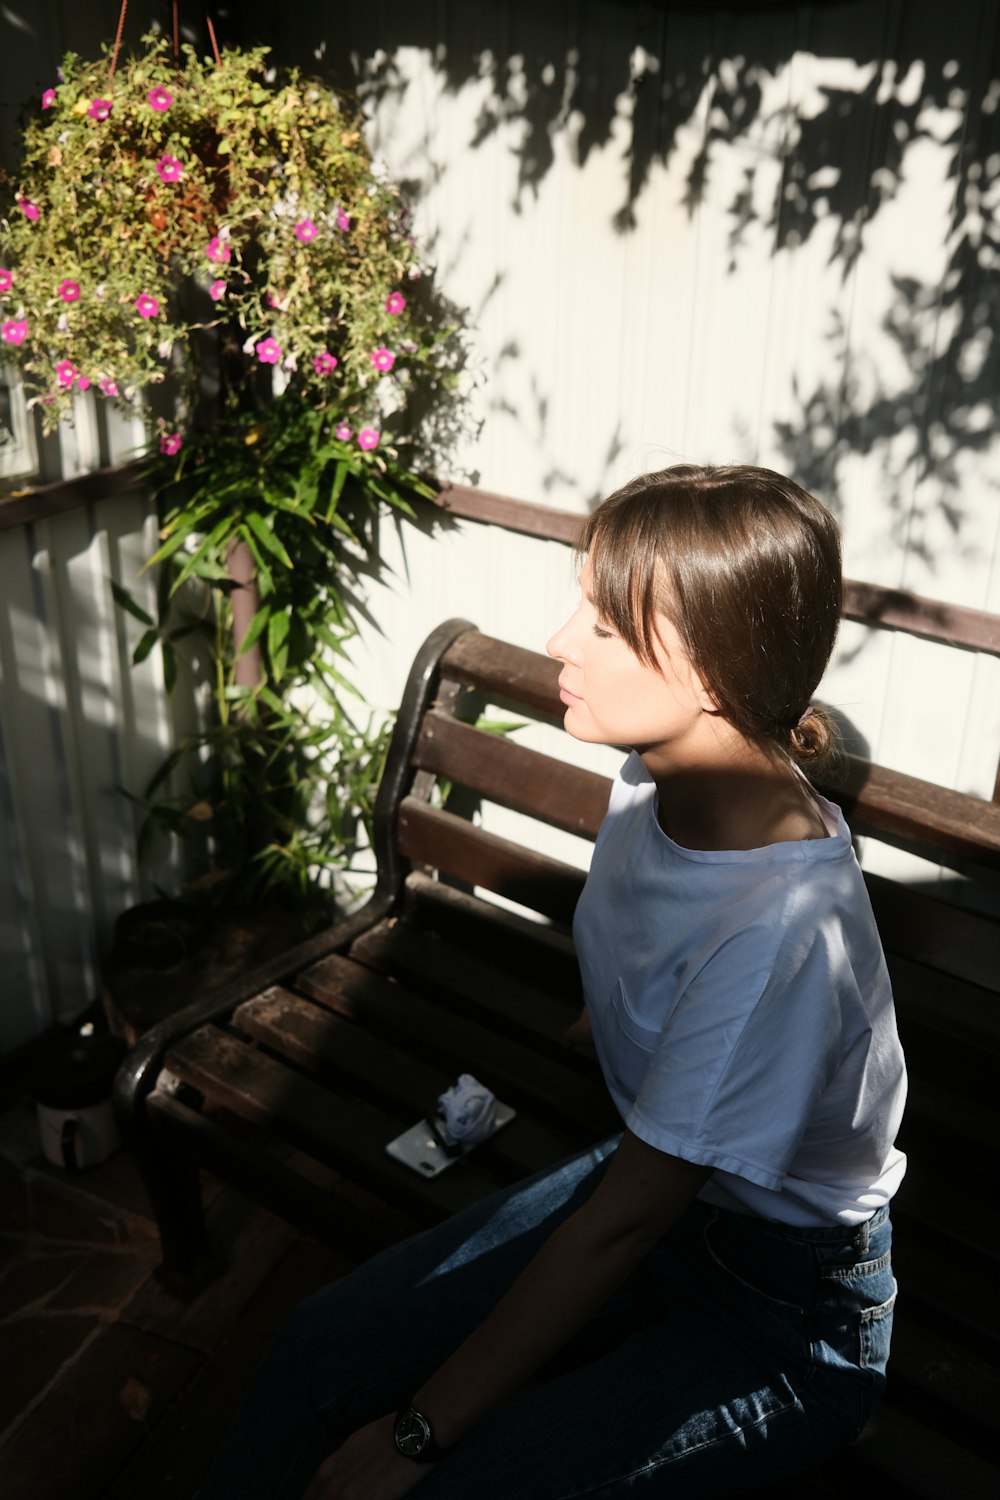 a young girl sitting on a wooden bench